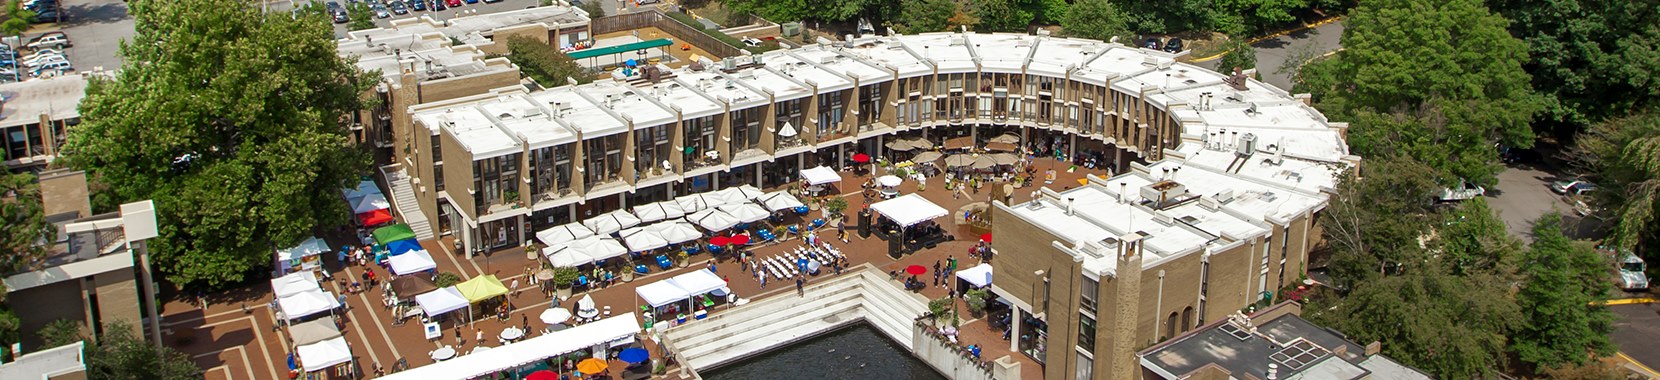 lake anne plaza shown from above